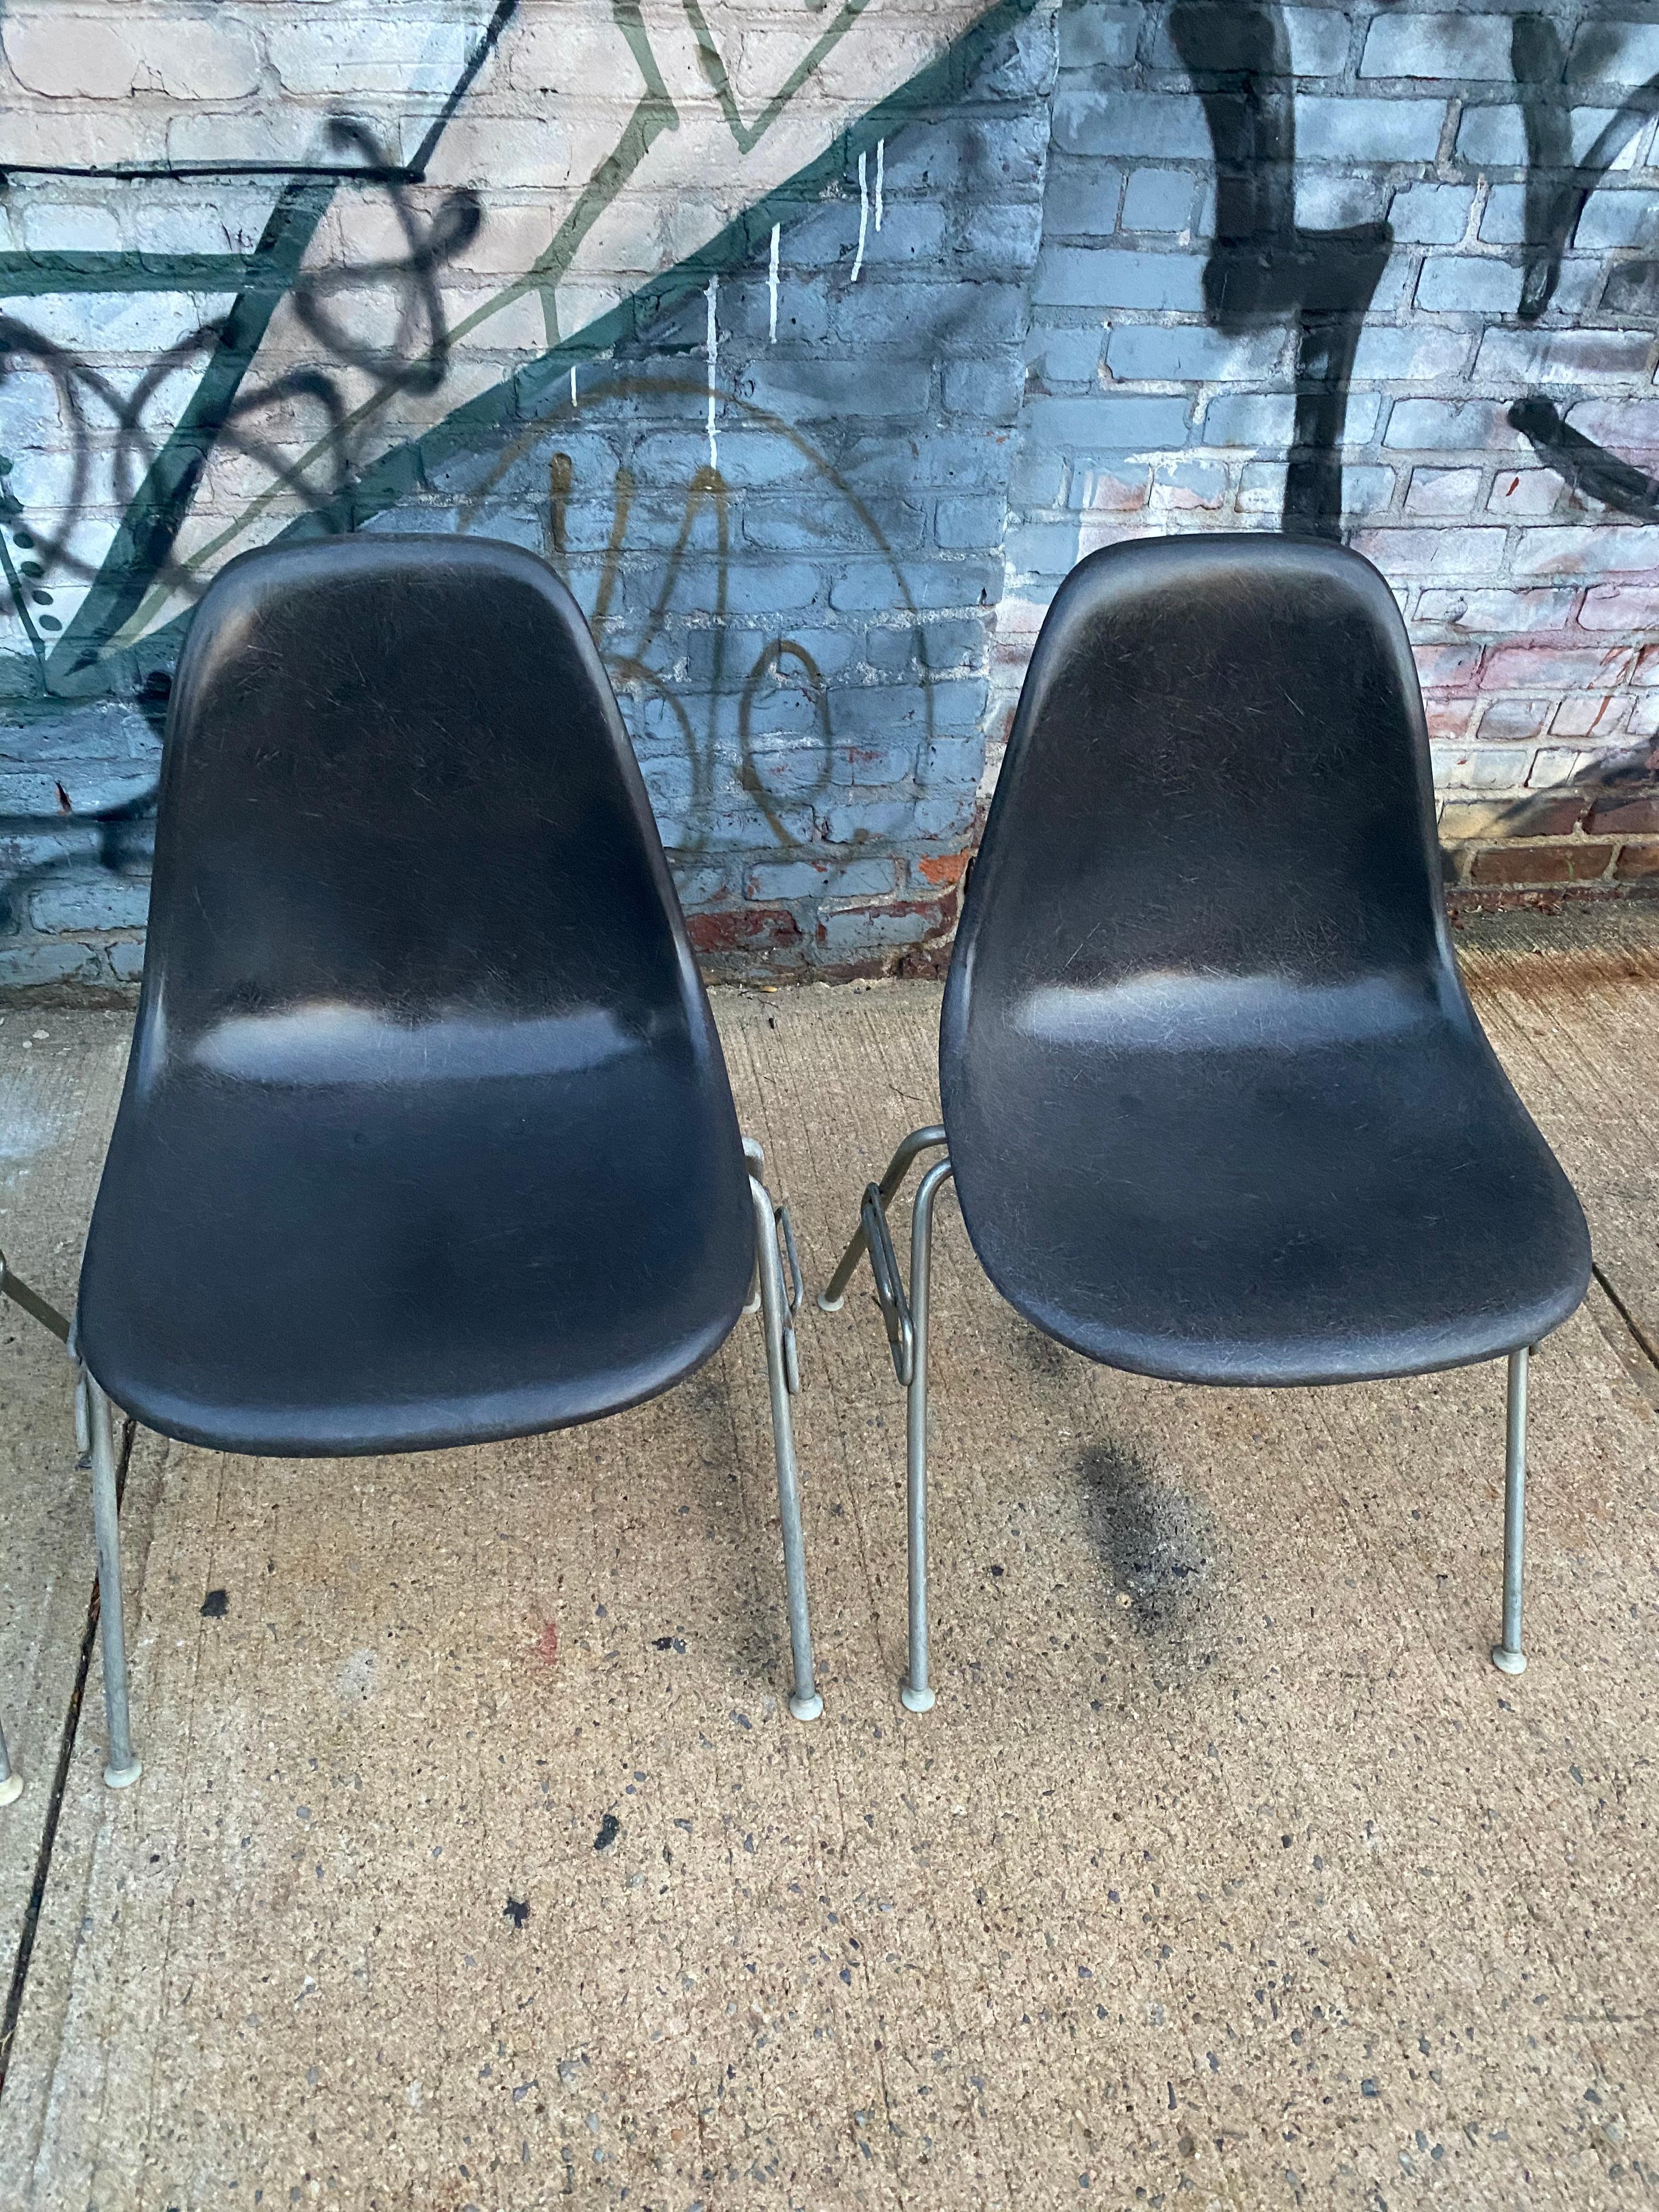 North American Set of 4 Herman Miller Eames Elephant Grey Stacking chairs